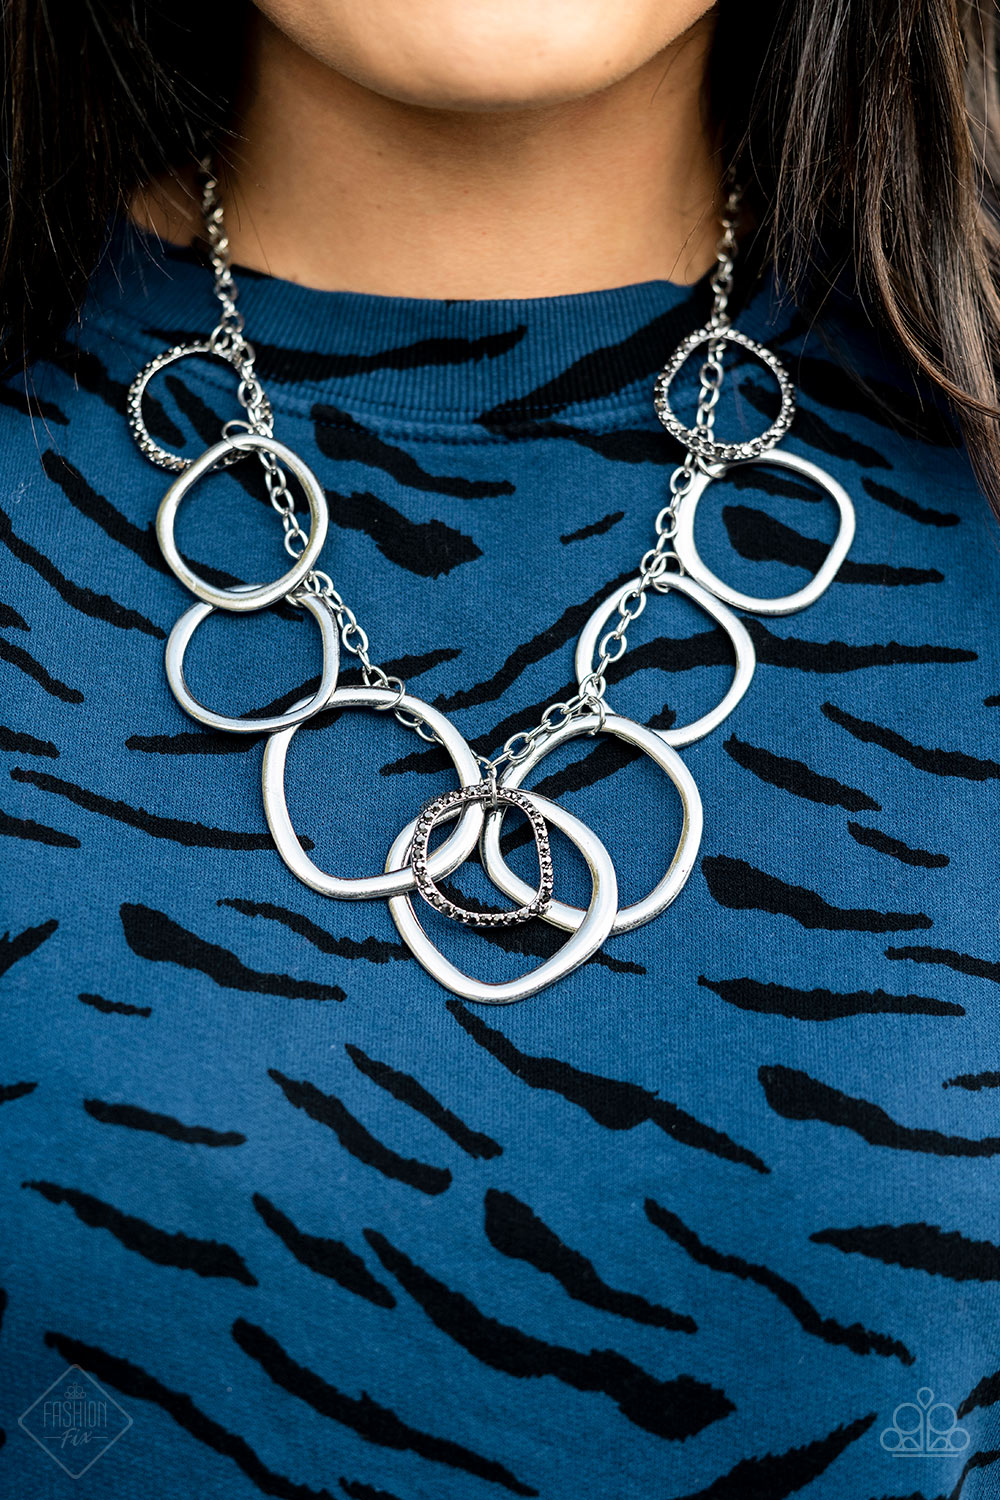 PRE-ORDER - Paparazzi Dizzy With Desire - Silver - Necklace & Earrings - Fashion Fix Exclusive June 2021 - $5 Jewelry with Ashley Swint